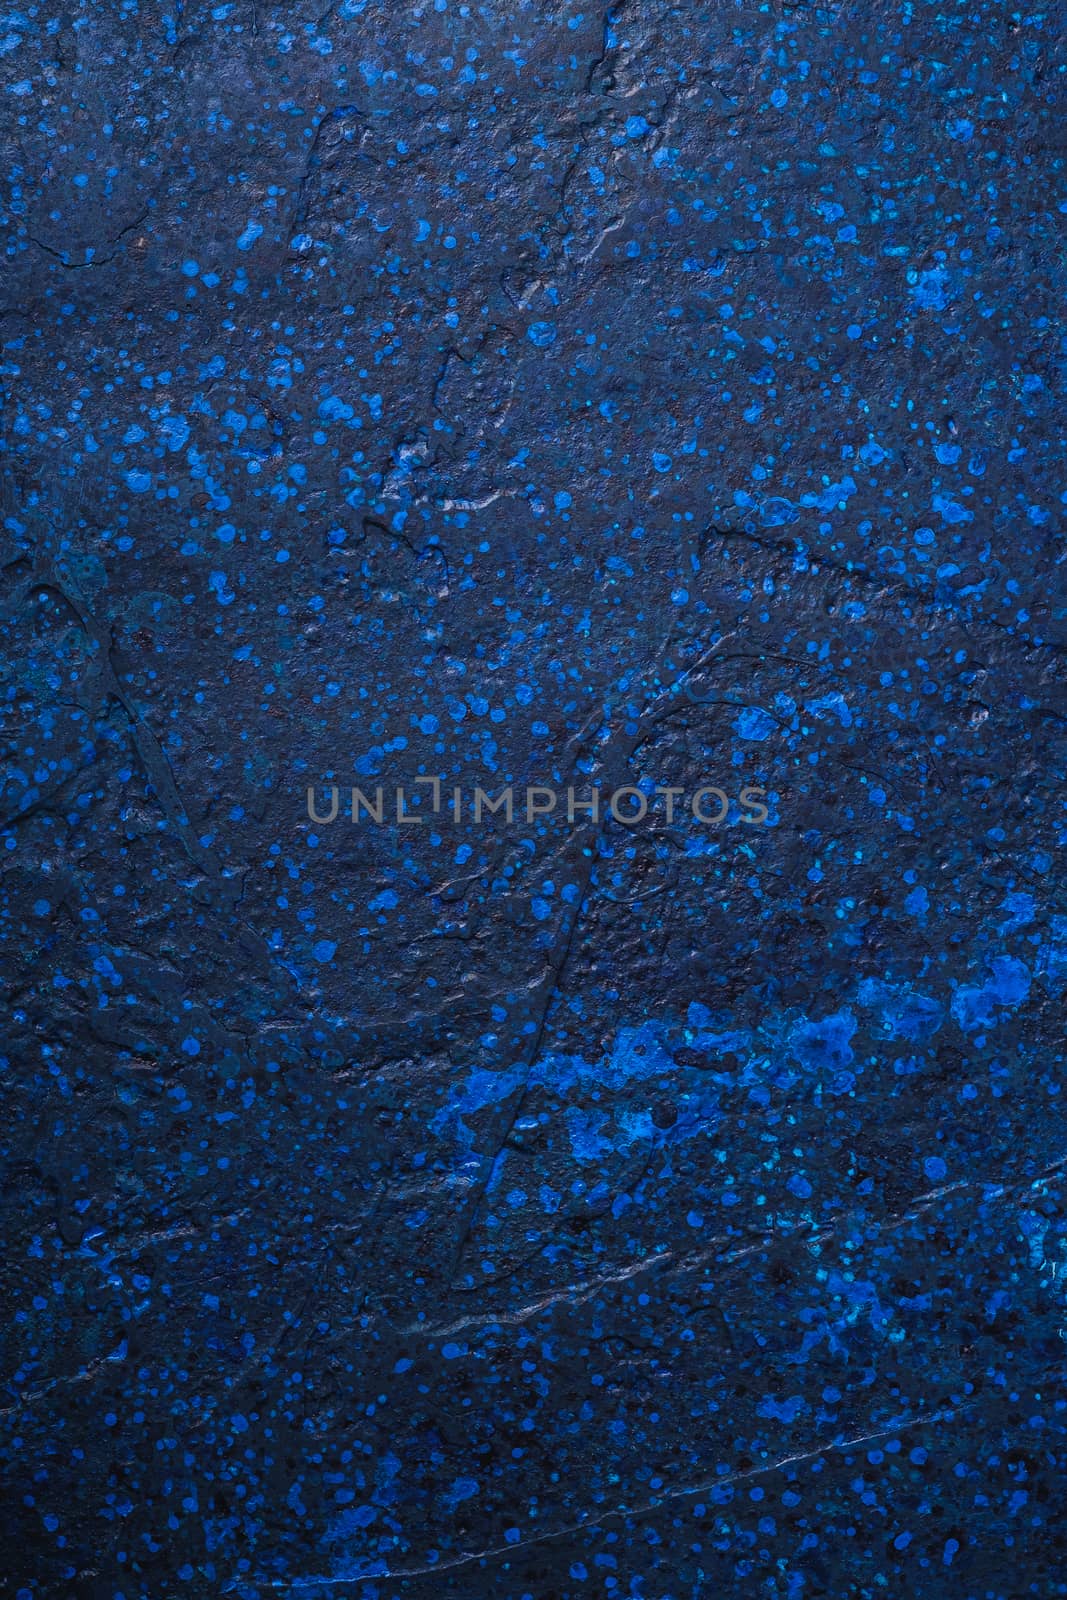 Dark blue color abstract background, stained art paint texture